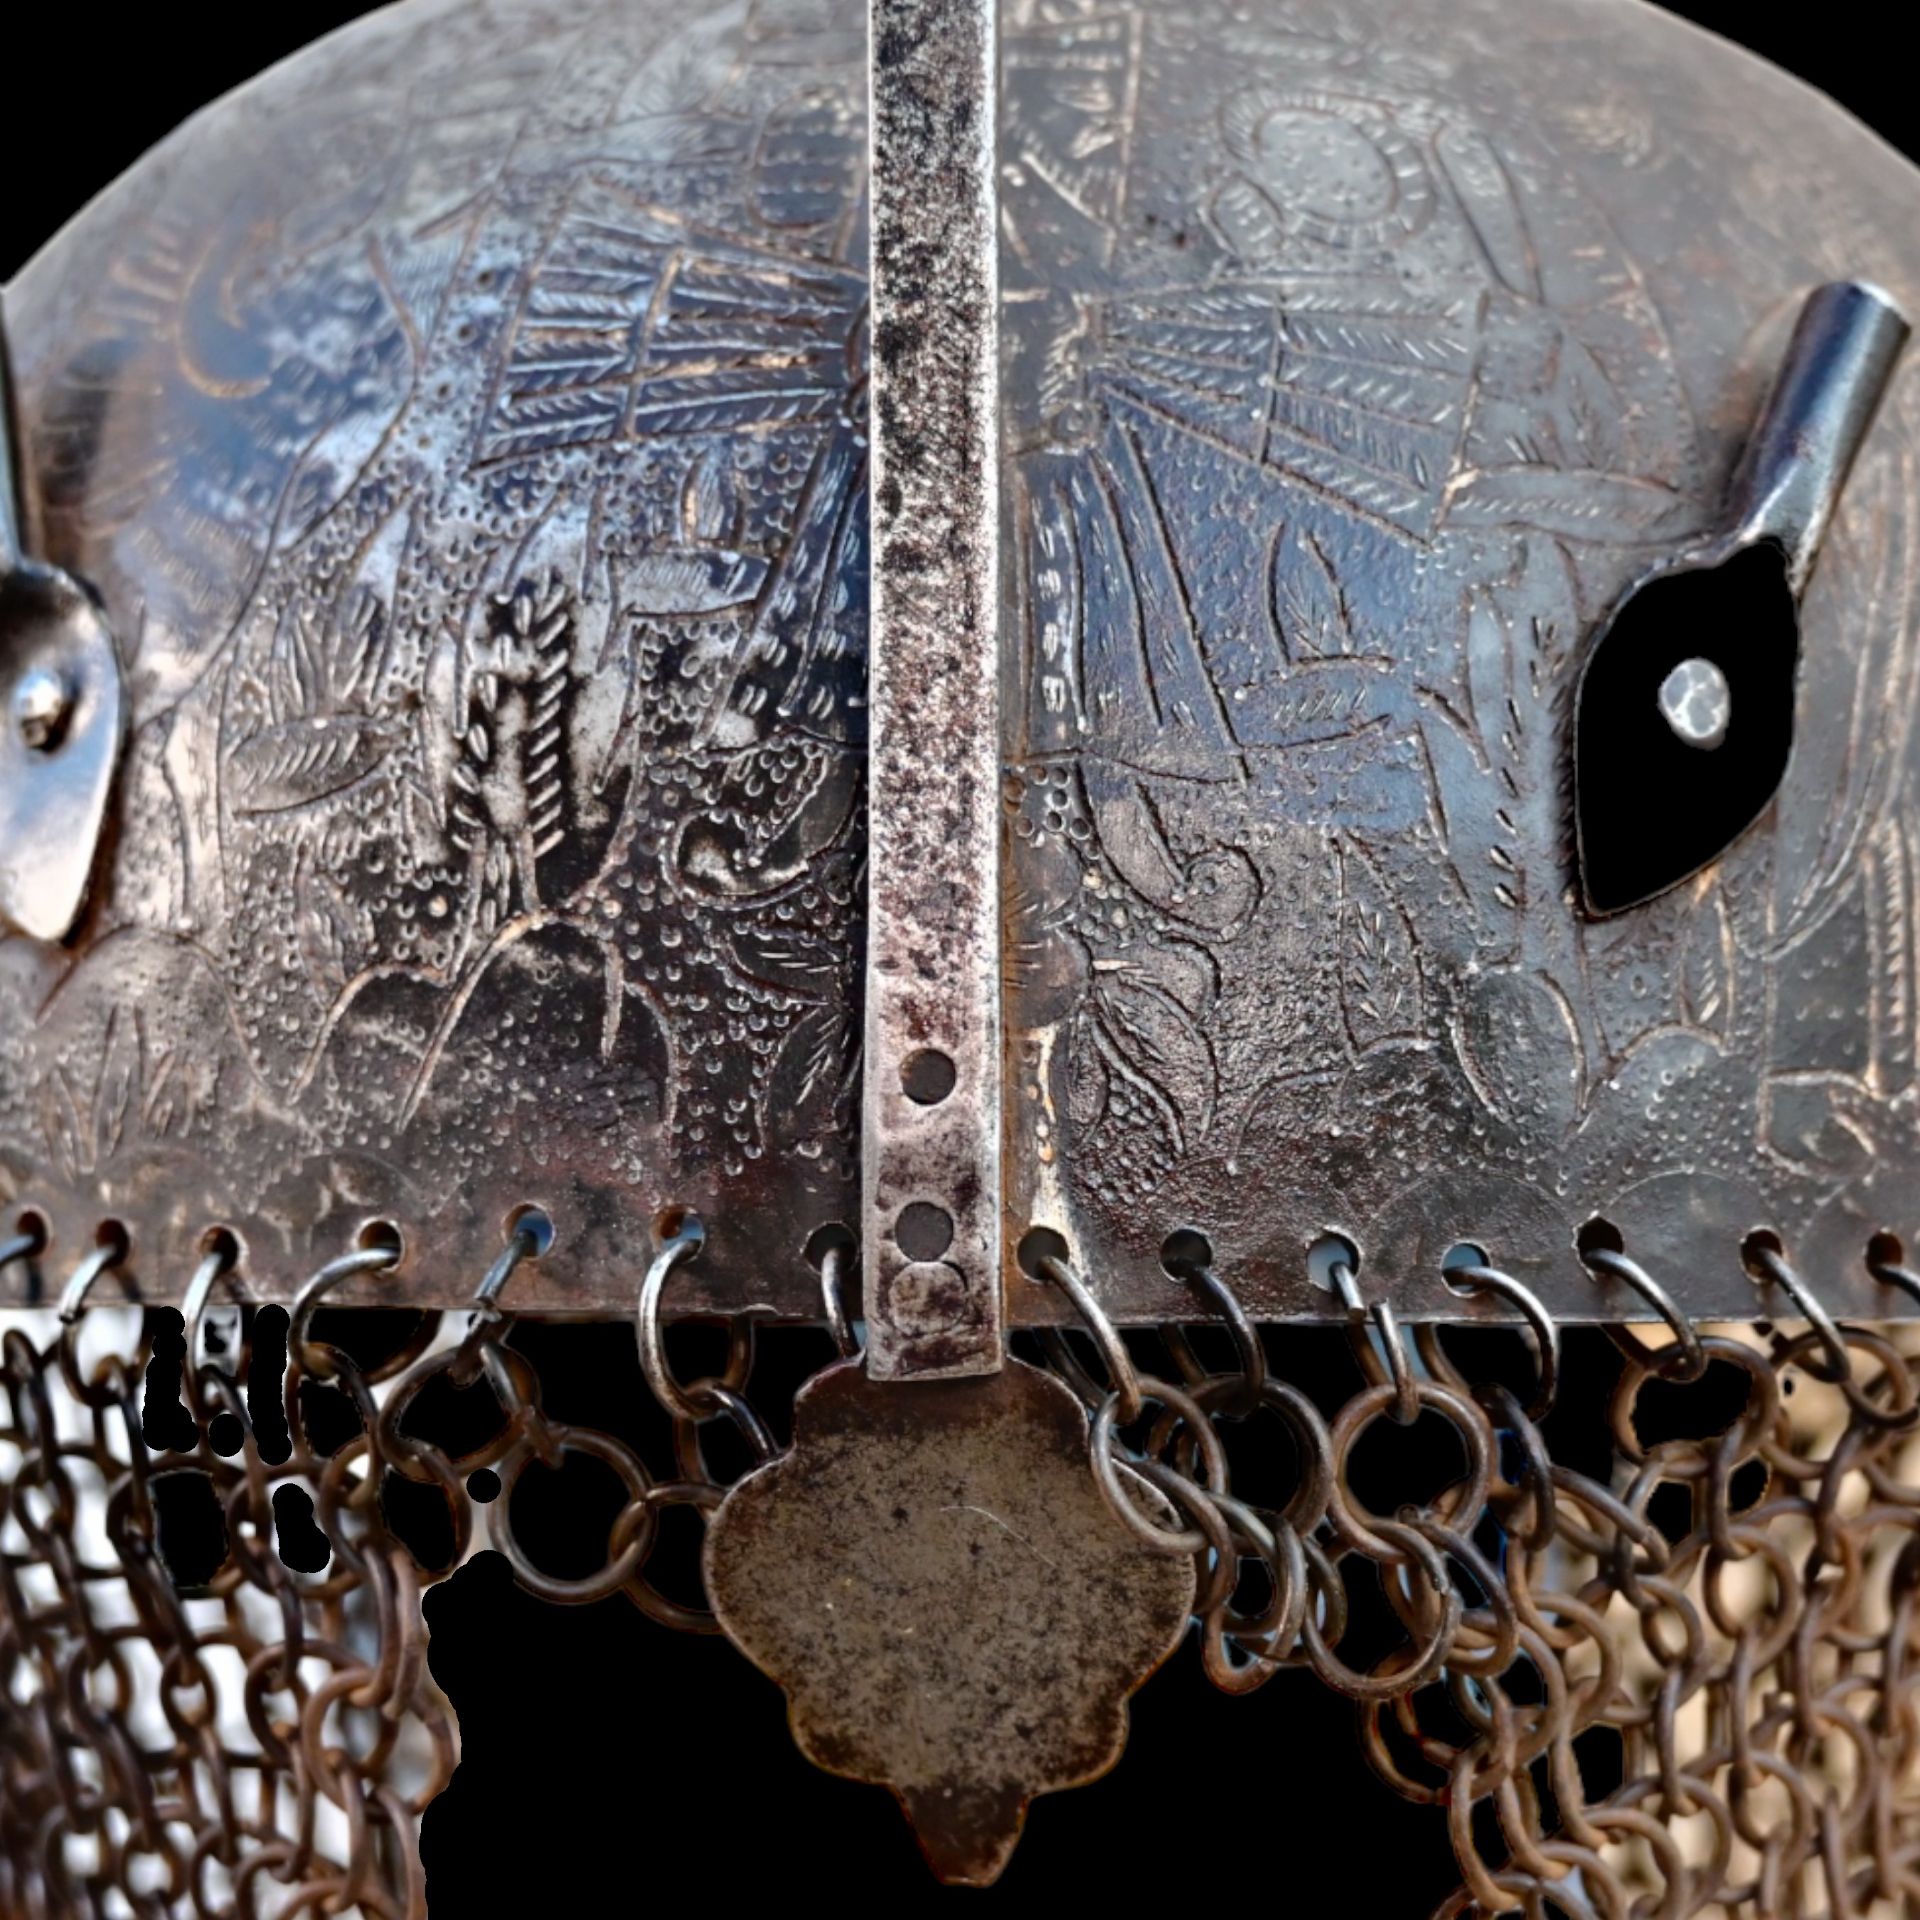 AN INDO-PERSIAN HELMET WITH BEAUTIFUL DECOR, 19TH CENTURY. - Image 5 of 10